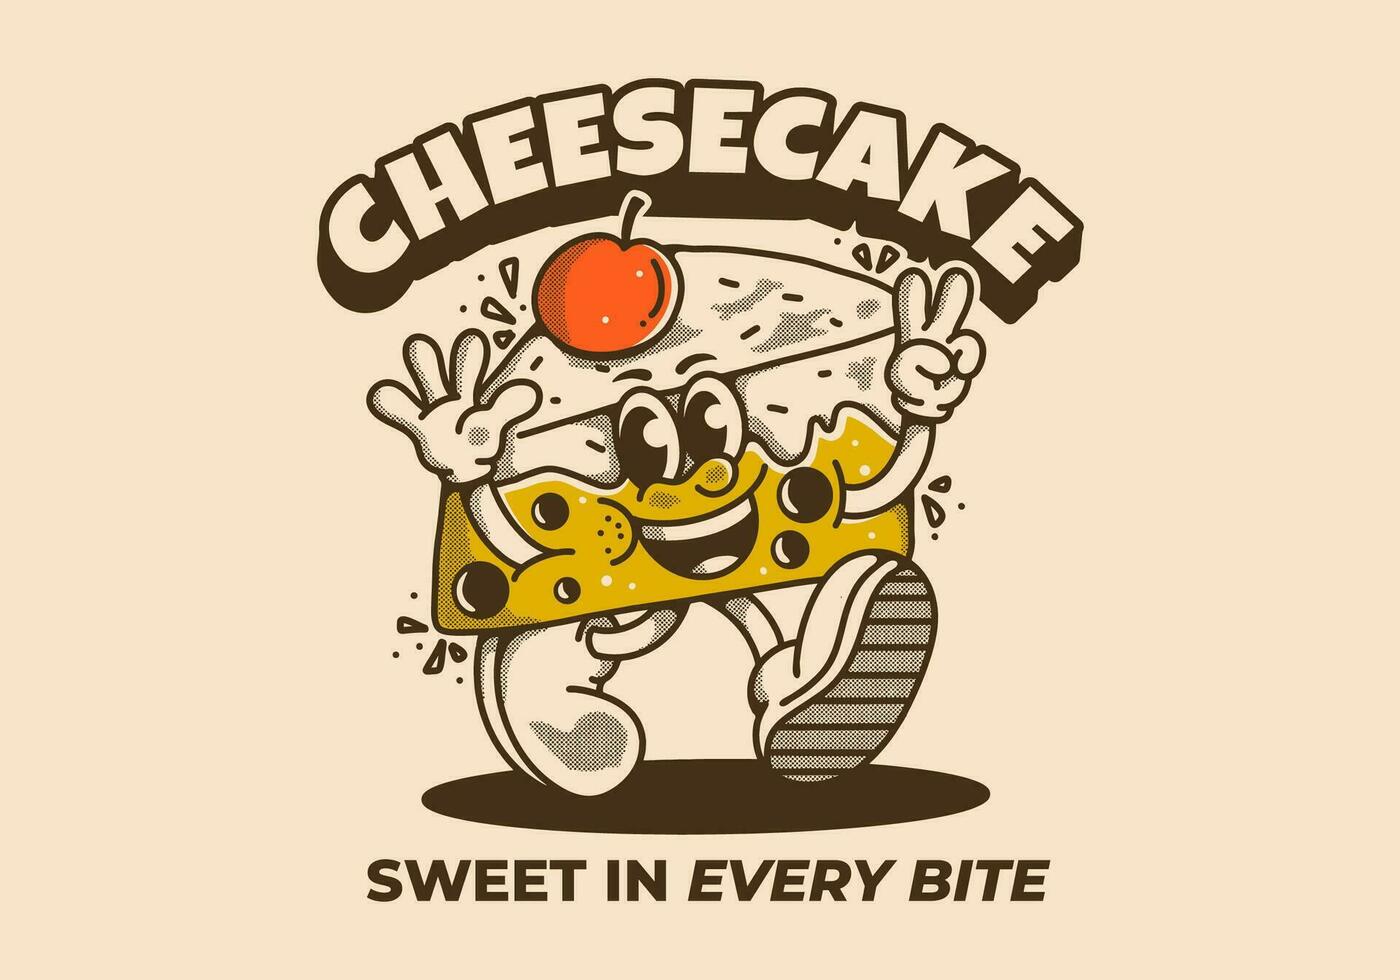 Cheesecake, sweet in every bite. Mascot character illustration of walking cheesecake vector